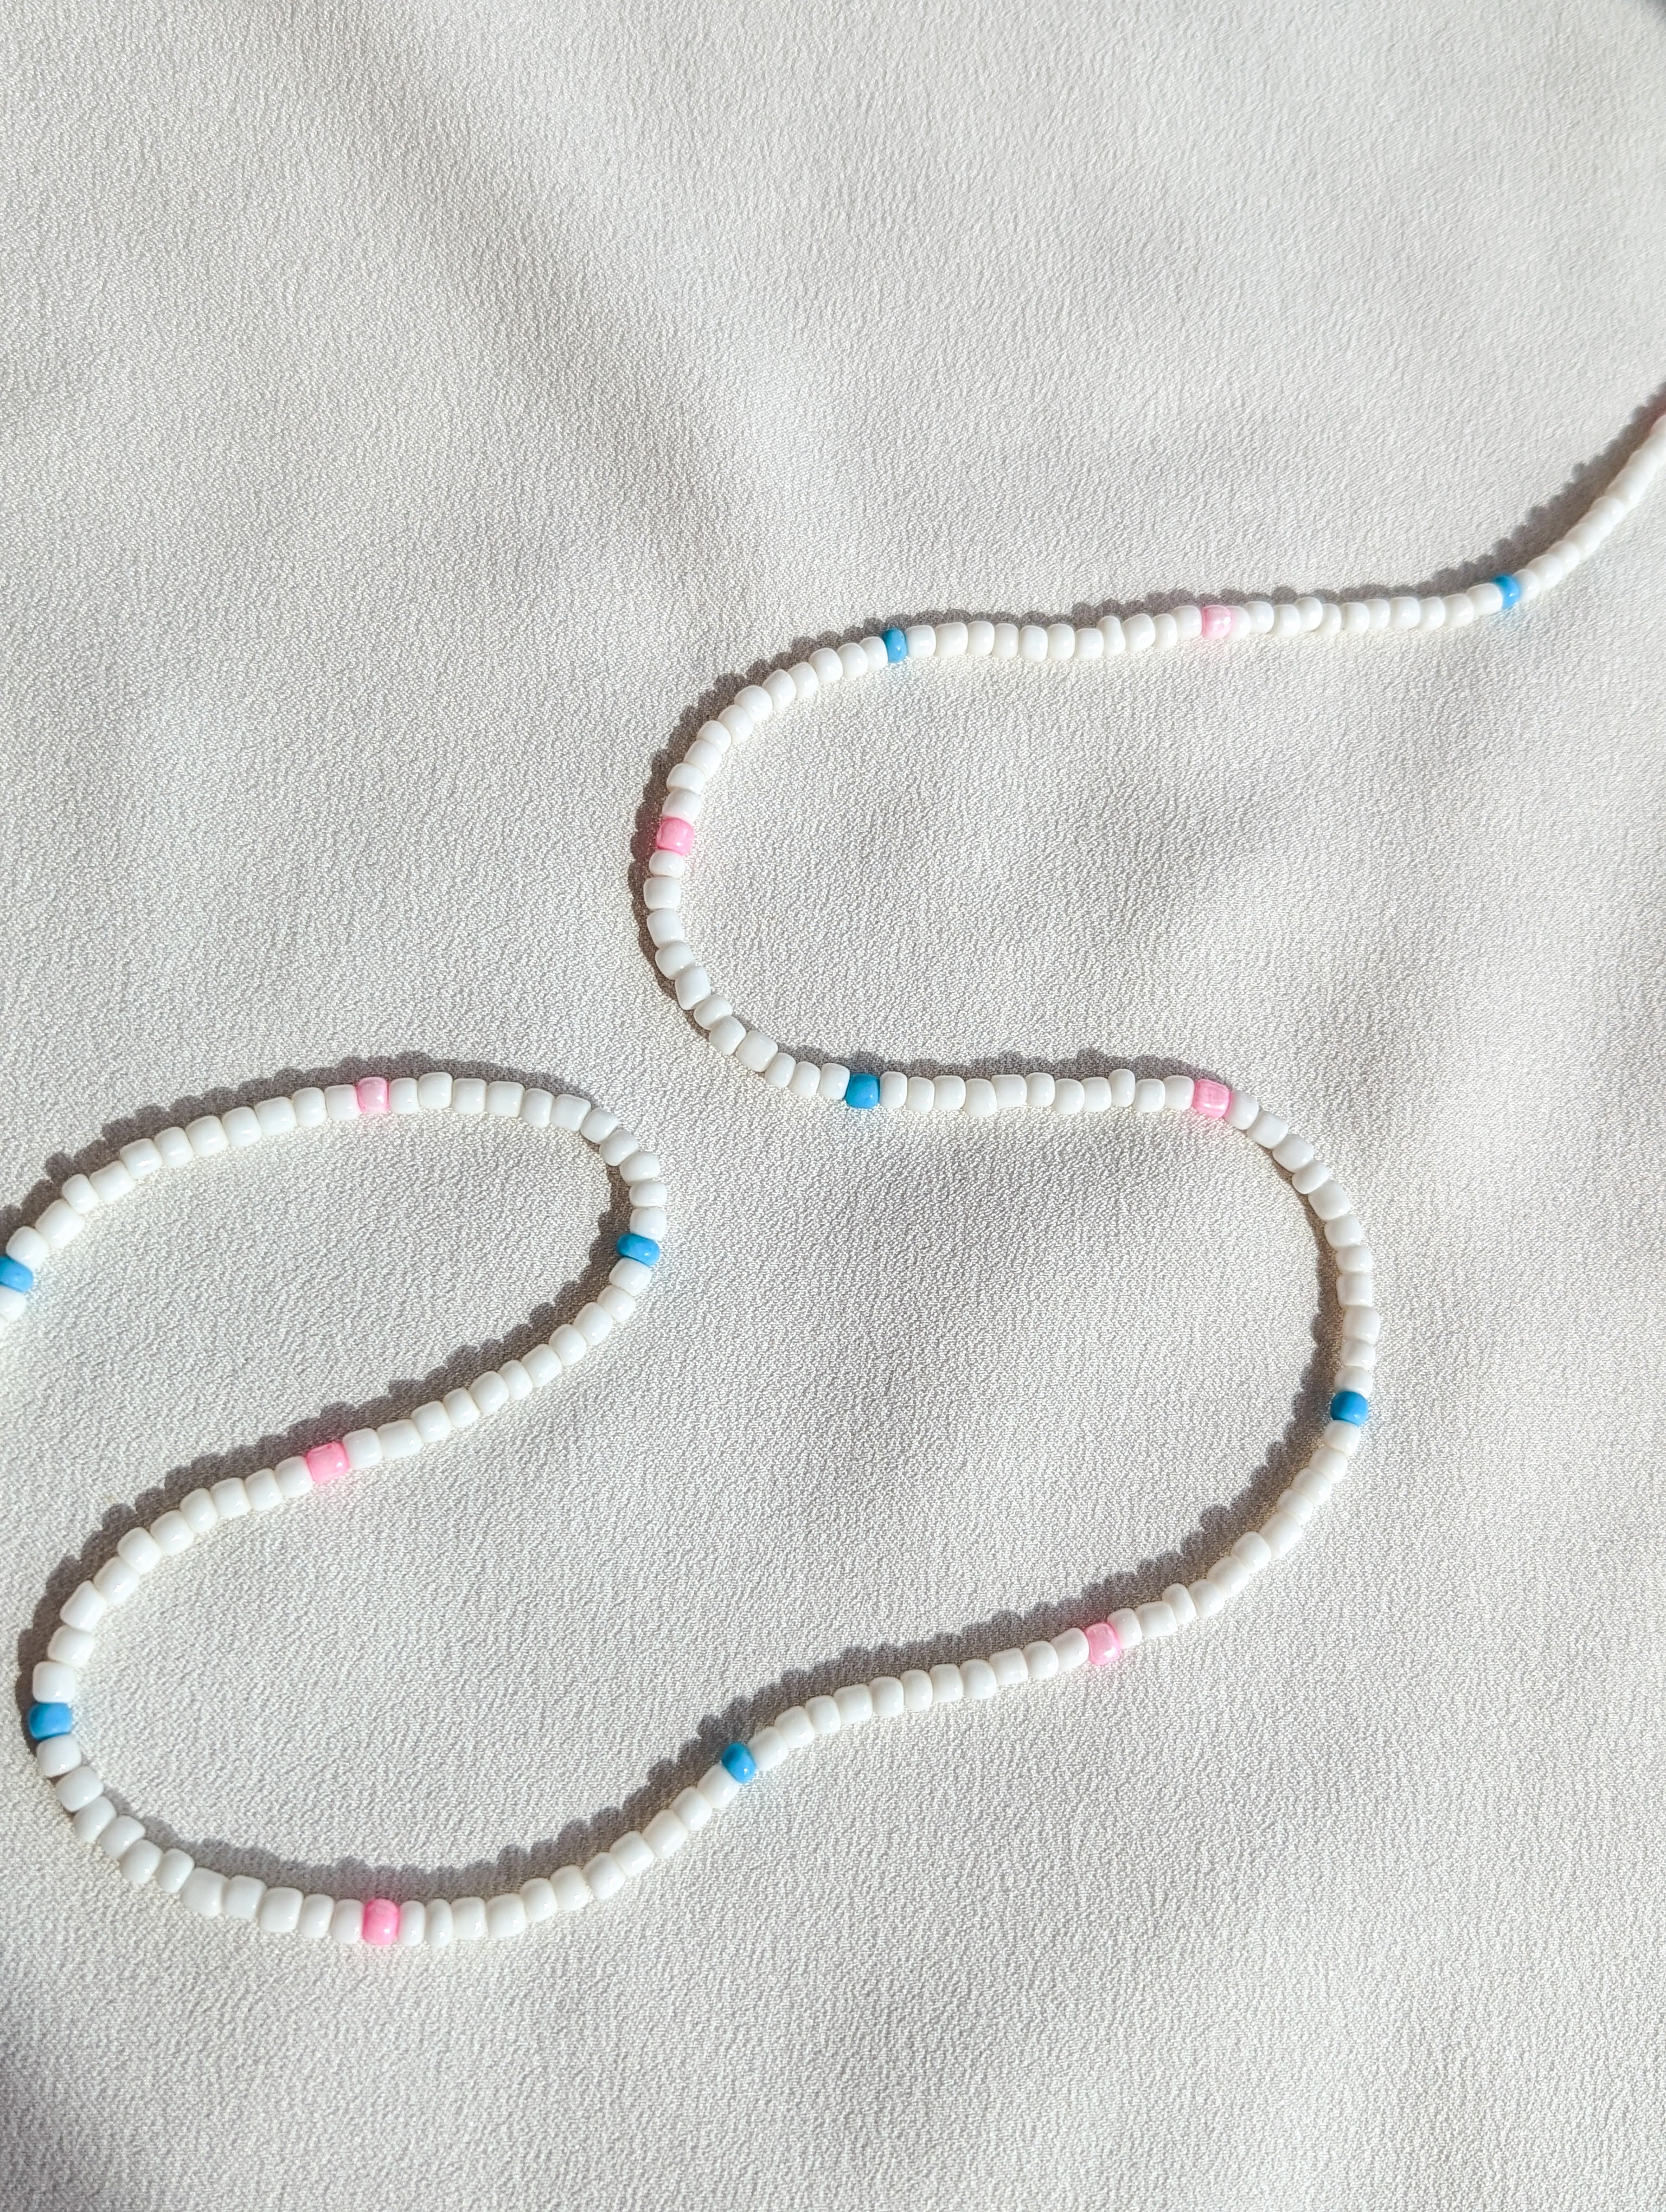 [THE ELEVEN] Belly Chain: White/Pink + Blue [Large Beads]